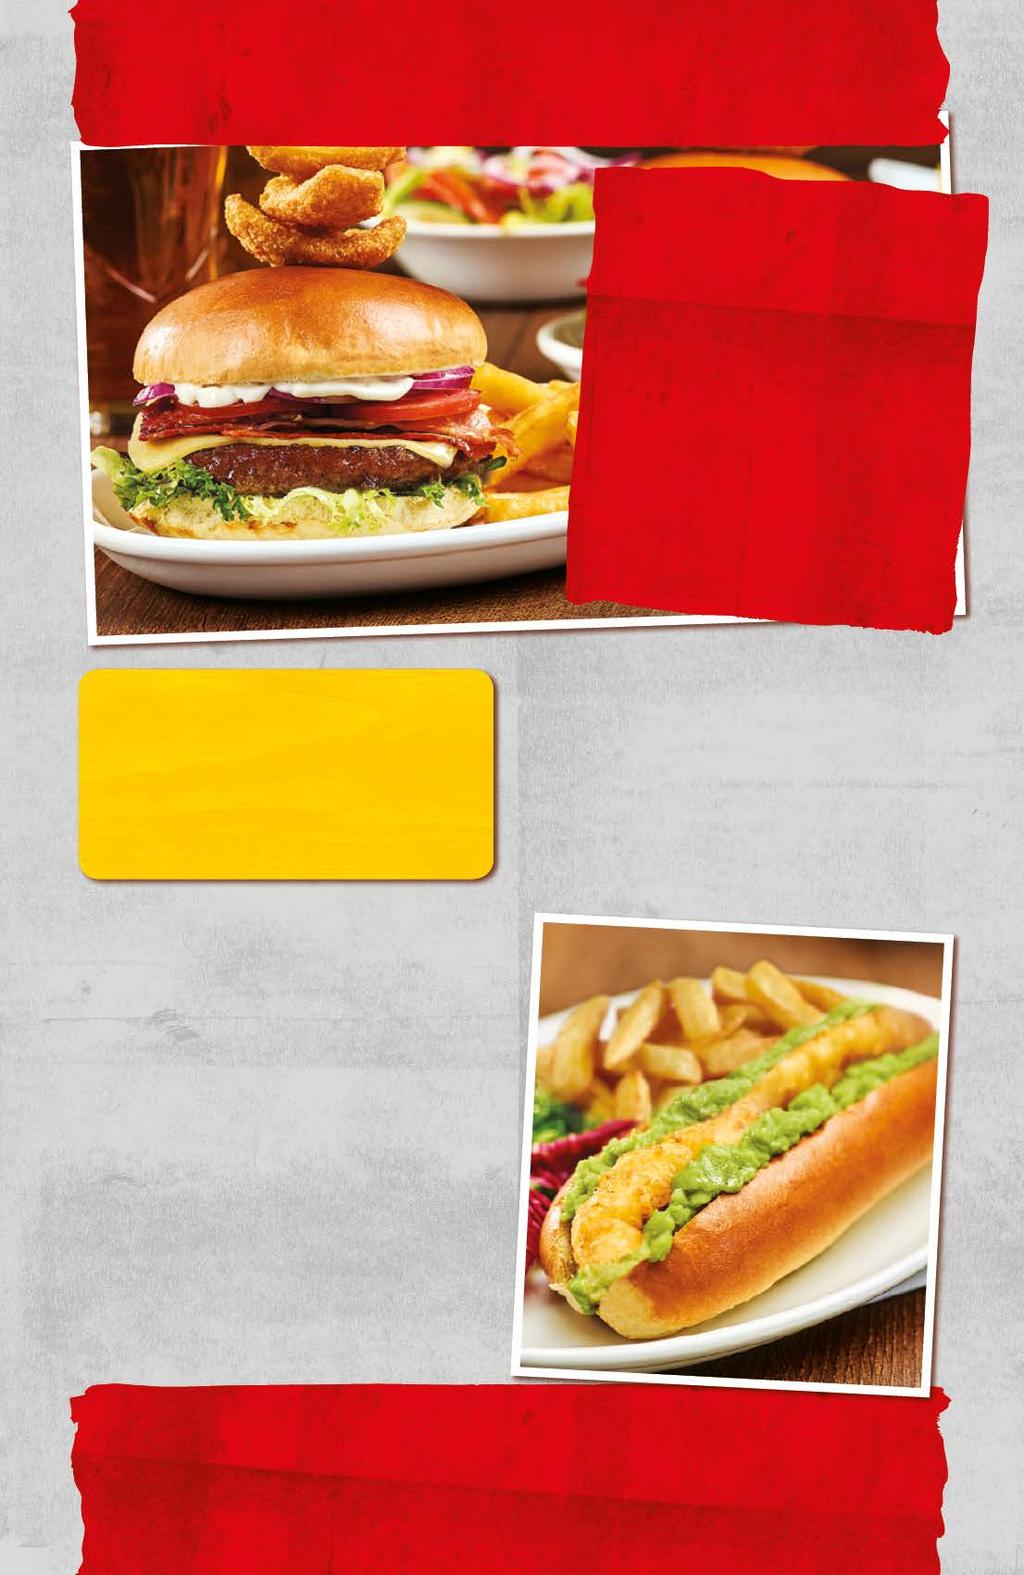 Burgers and More... from only 4.09 the ULTIMATE burger HAS IT ALL! CHOOSE CHICKEN OR BEEF (4oz) 5.